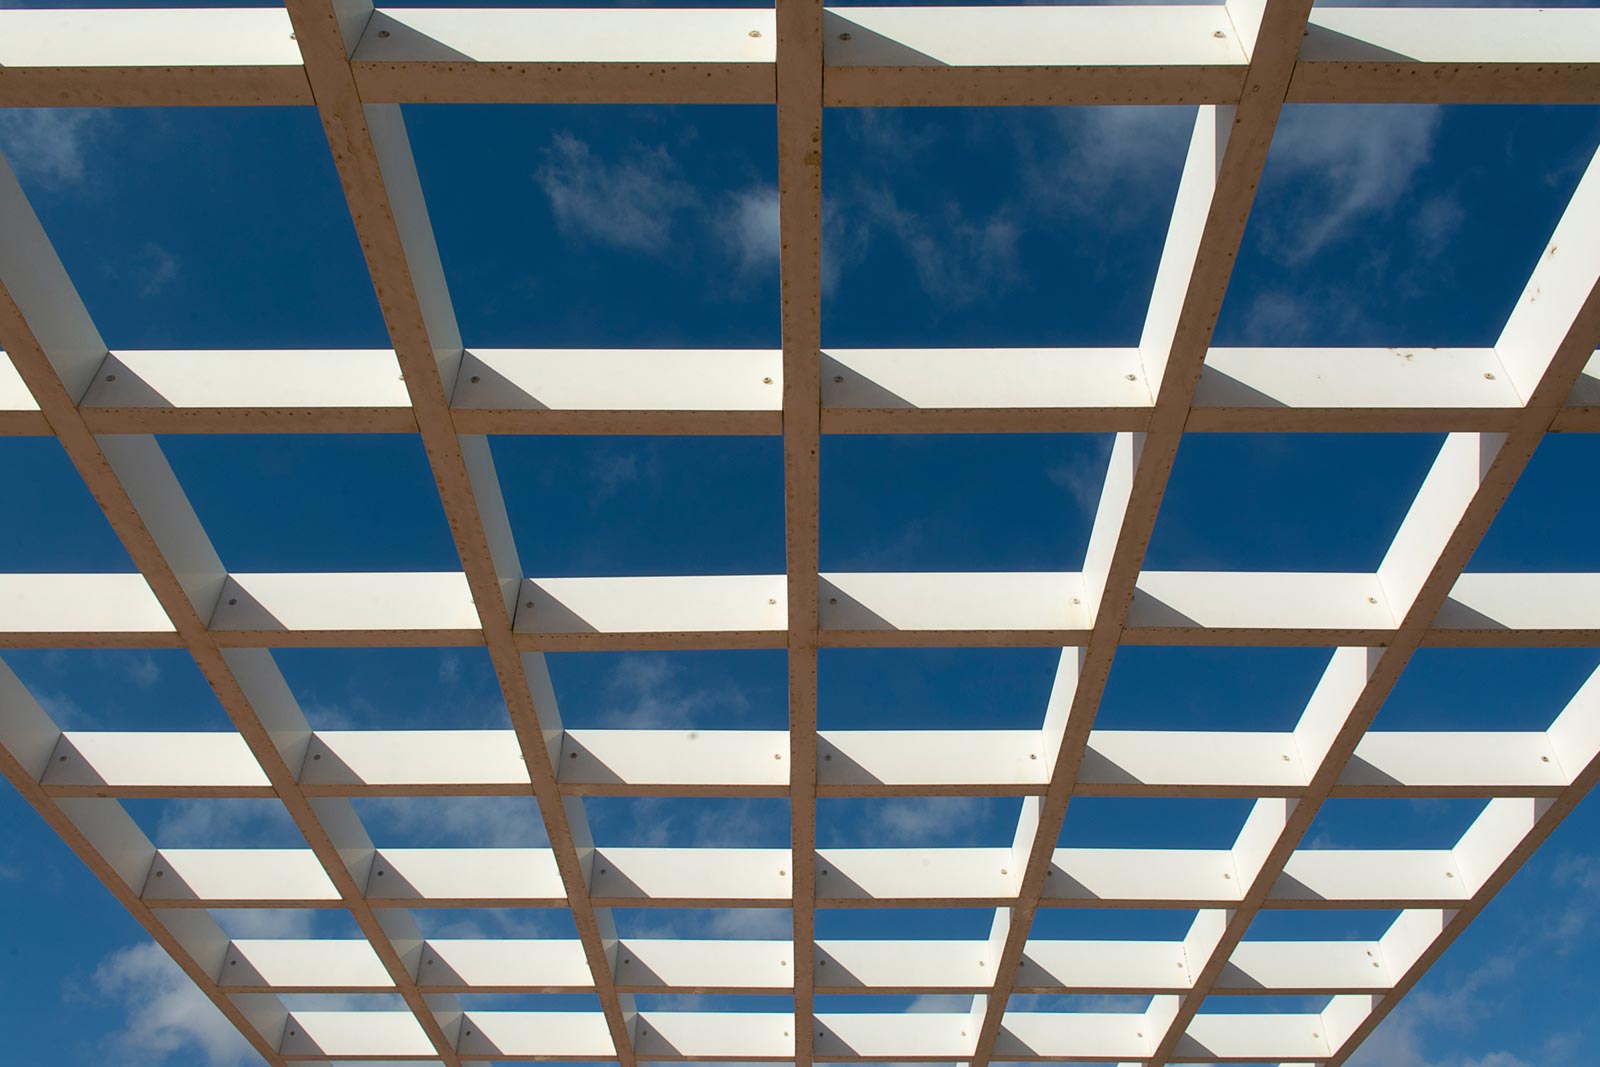 An open pergola roof grid with clear view of the blue sky